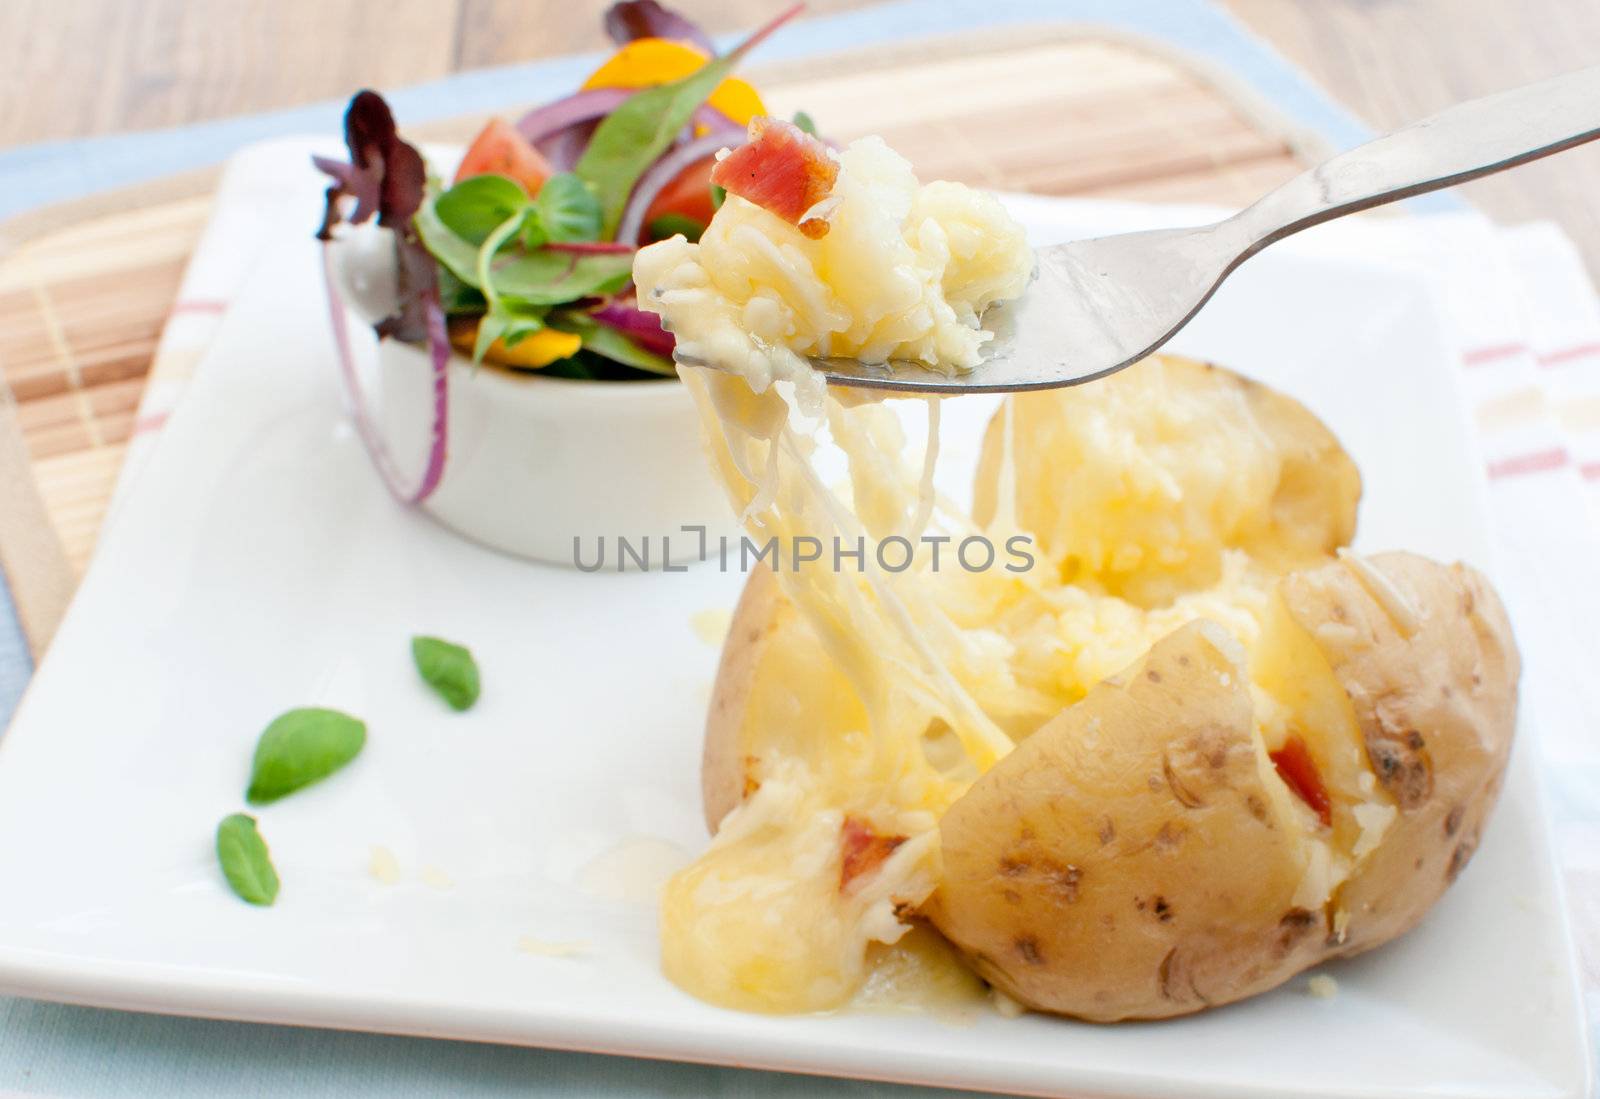 Melting cheese and bacon pieces with baked potato and salad in a bowl